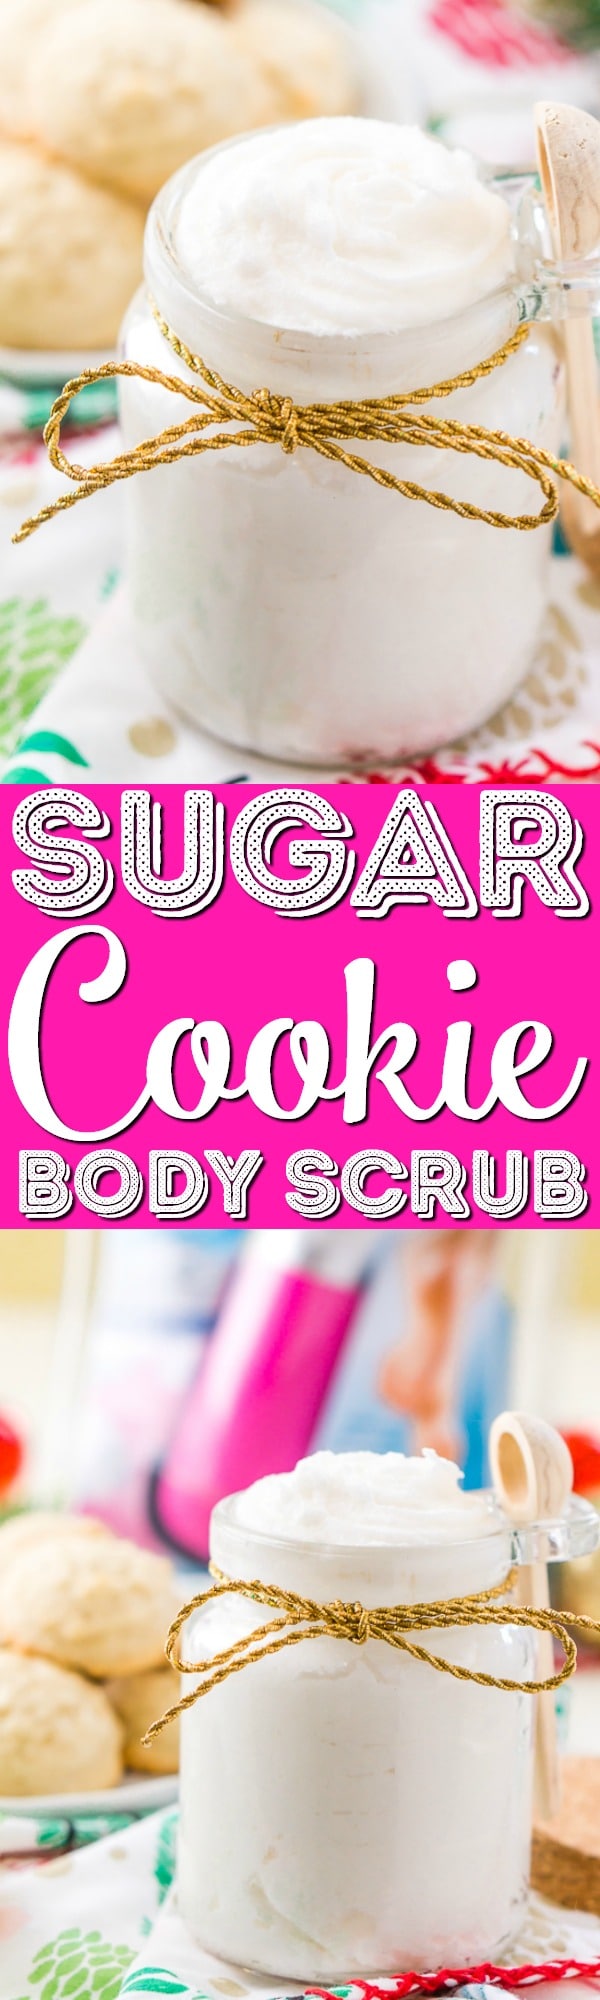 This Sugar Cookie Body Scrub is made with sugar, coconut oil, fragrance oil, you'll love how easily this 3-ingredient DIY gift comes together! via @sugarandsoulco